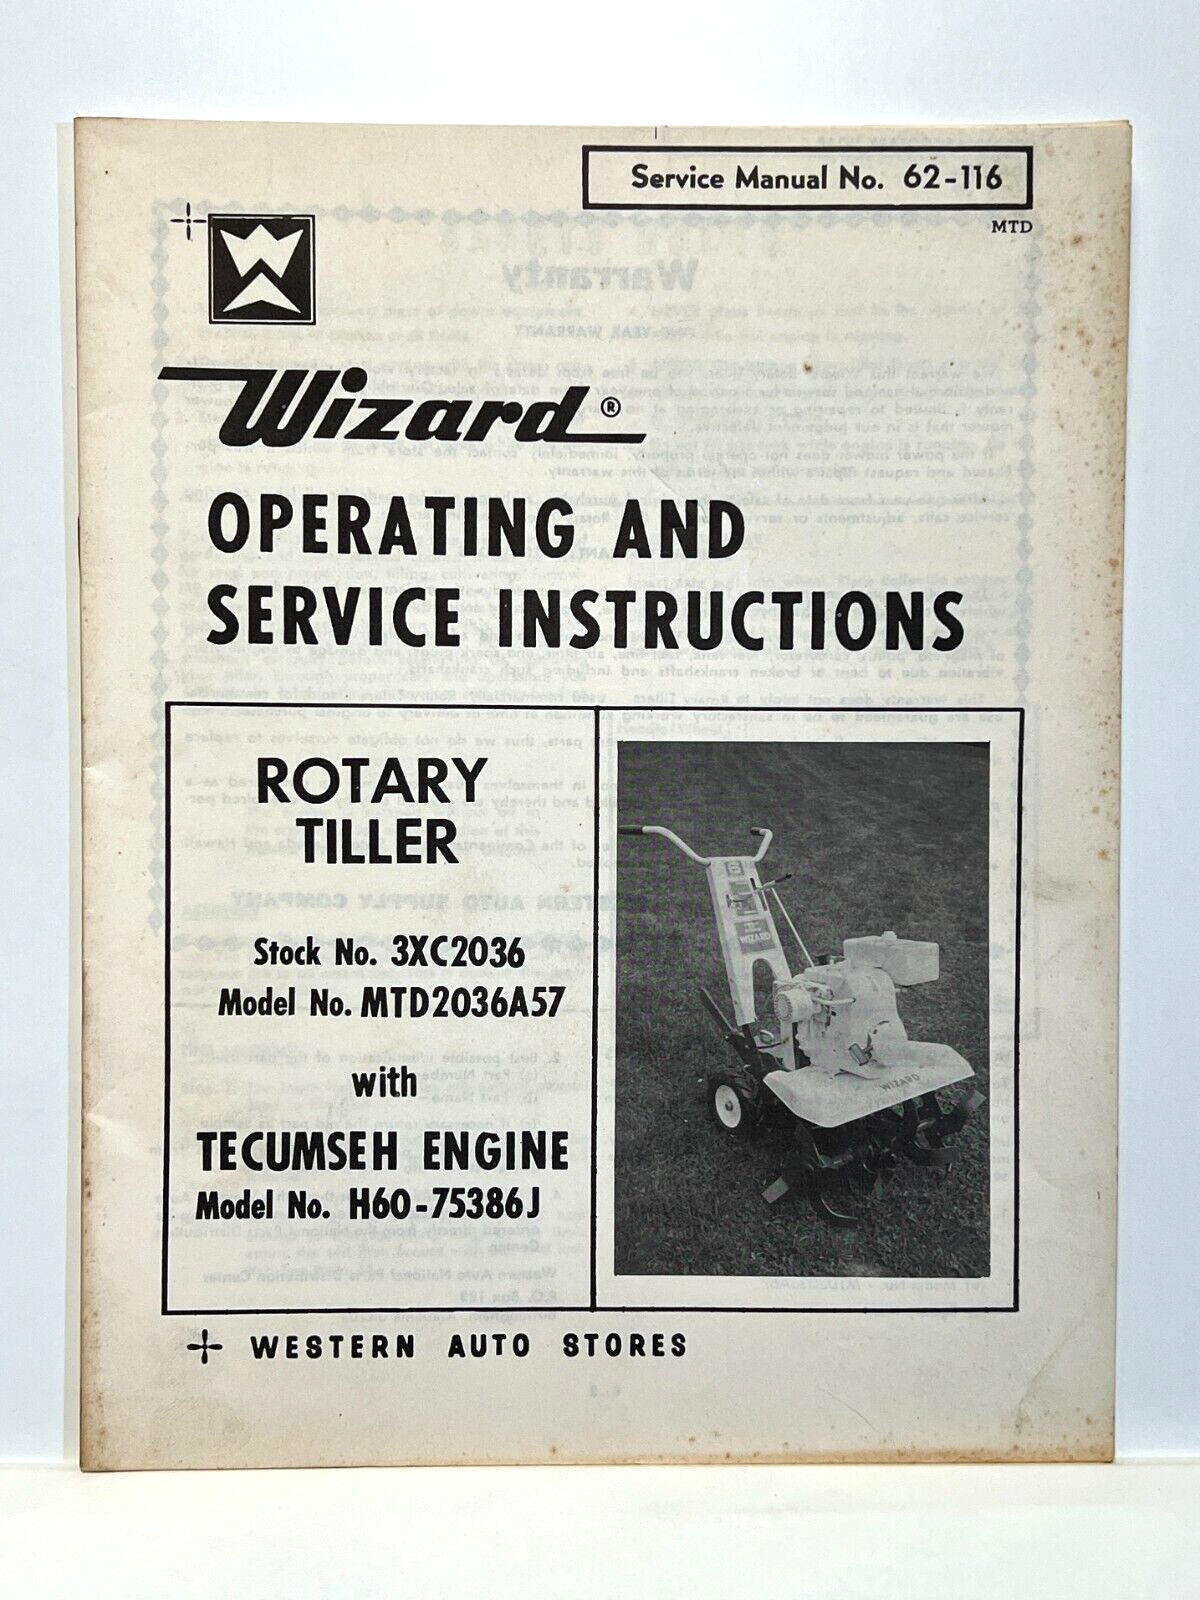 Vintage Western Auto Stores Wizard Rotary Tiller Operating Service Owners Manual